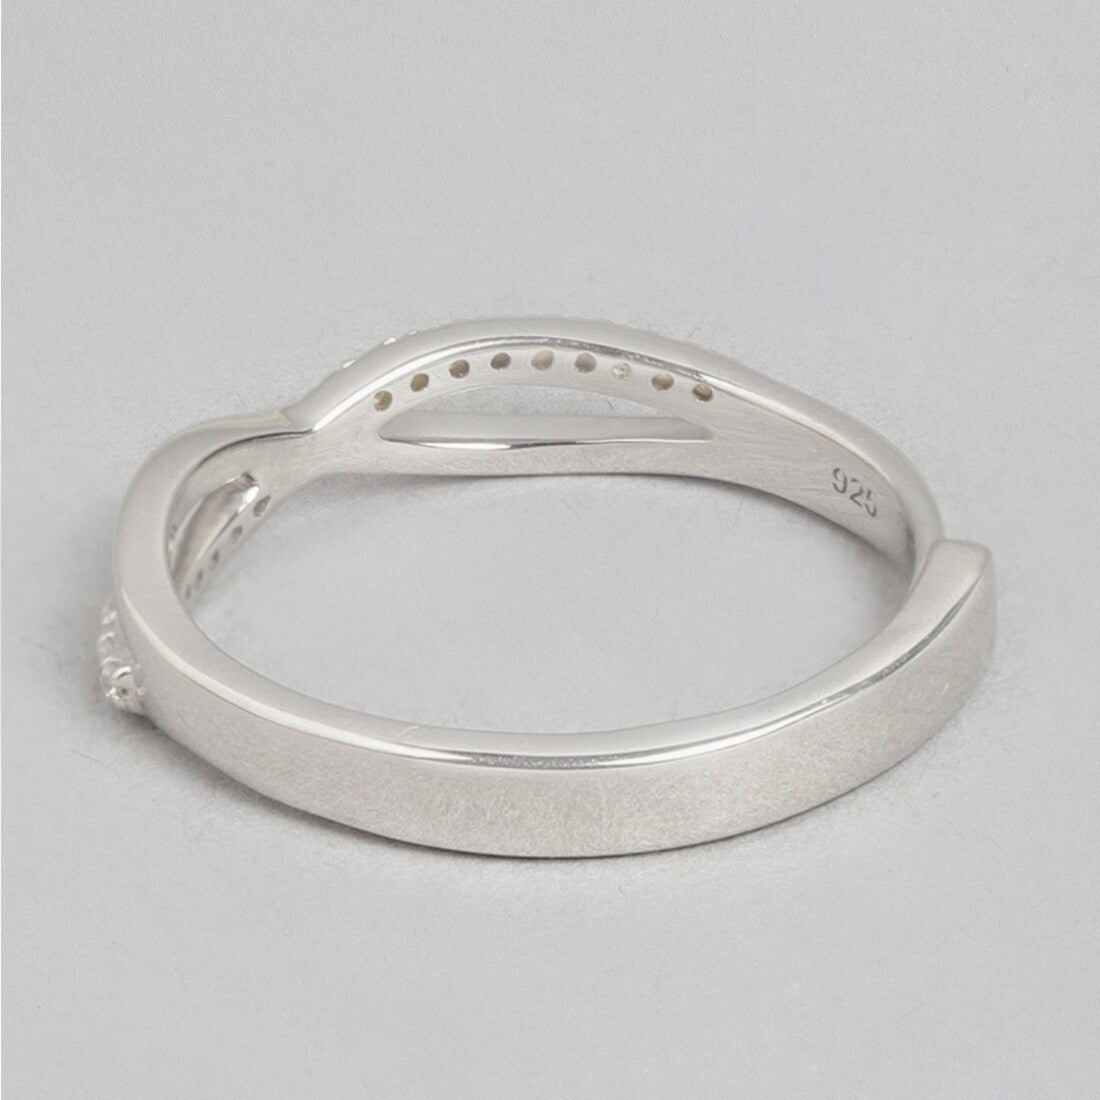 Endless Sparkle Rhodium-Plated 925 Sterling Silver Infinity Ring for Her (Adjustable)